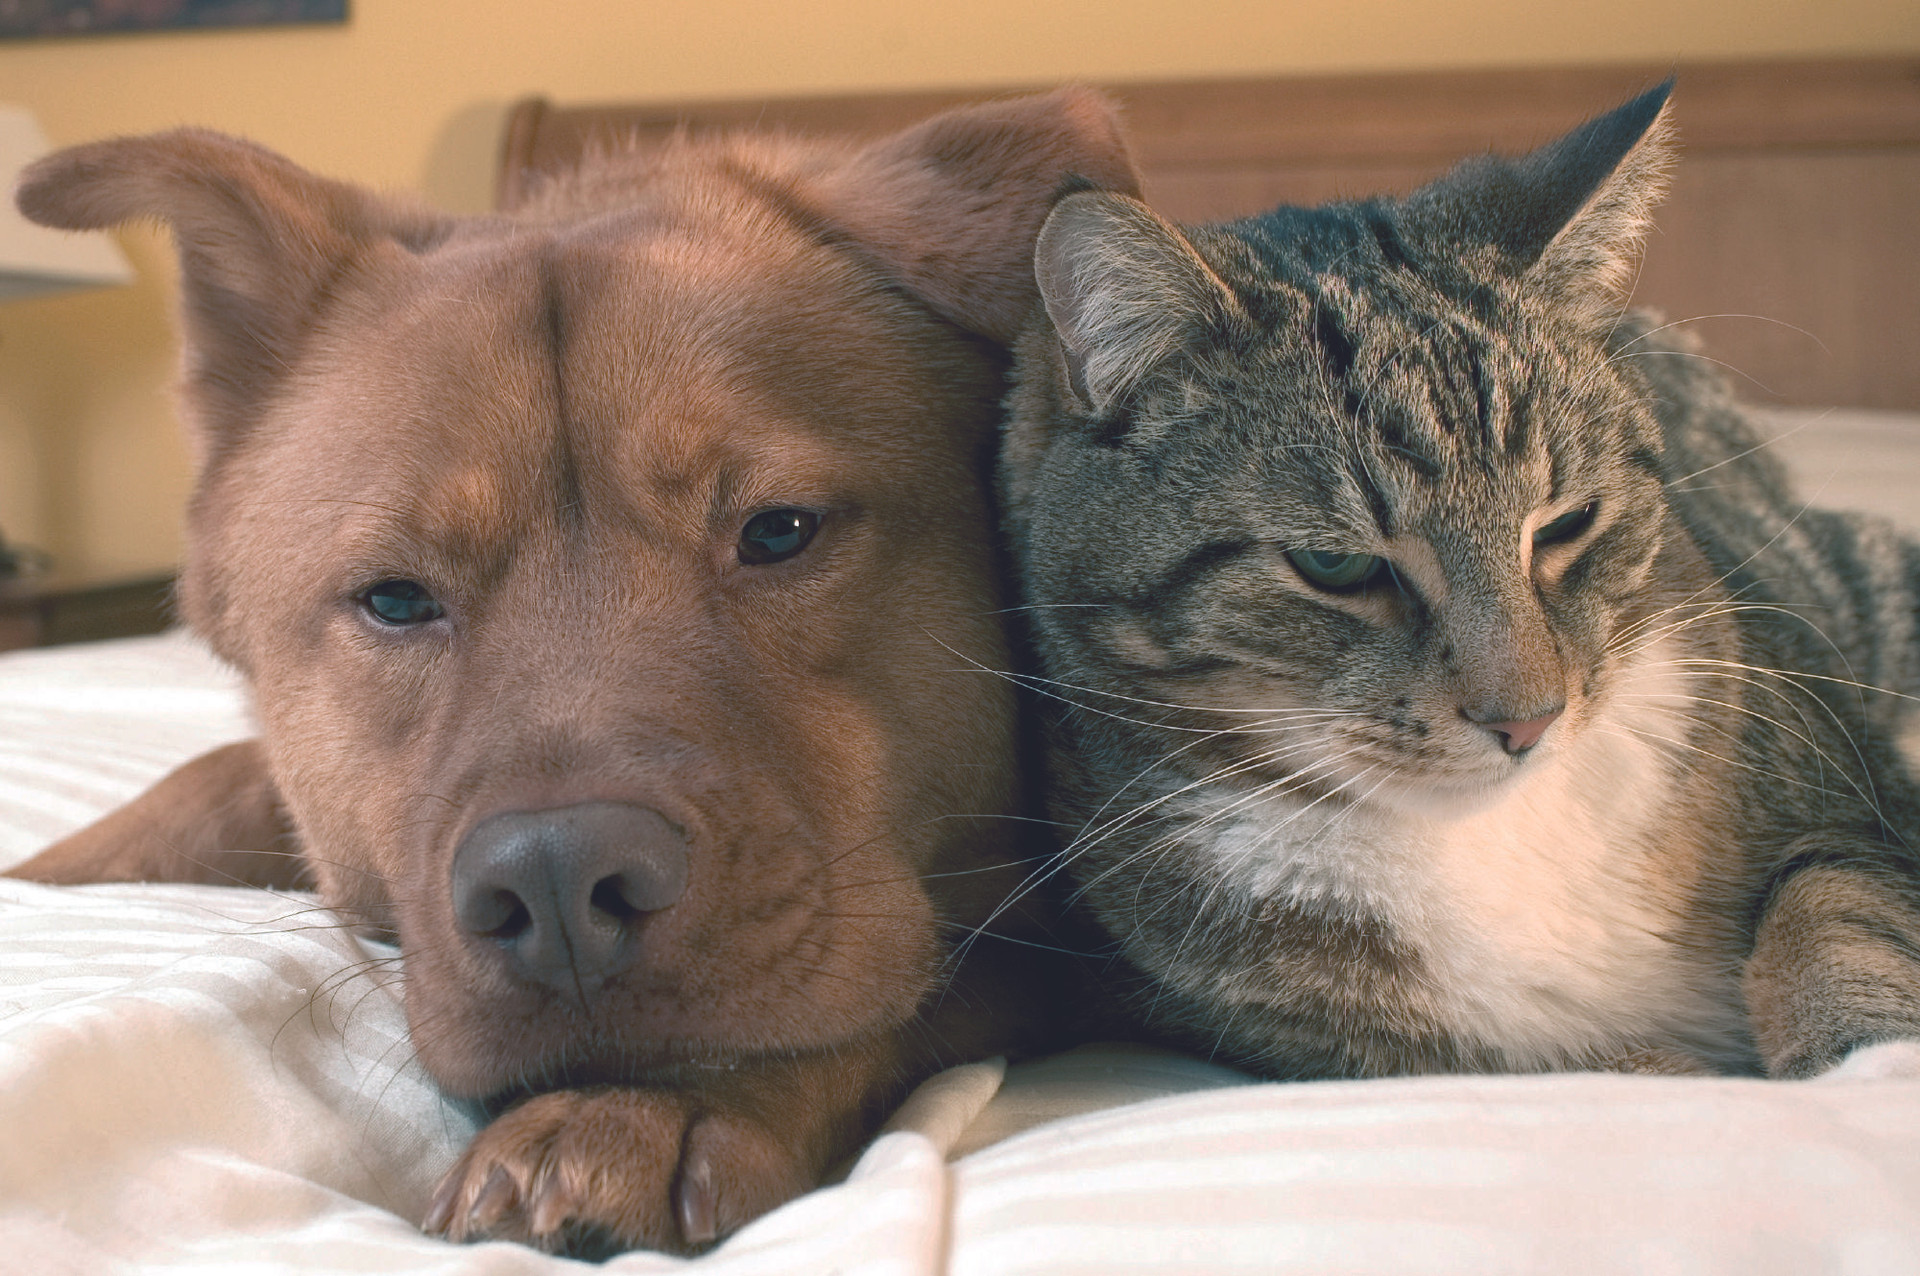 Dog and cat relaxing together on a bed